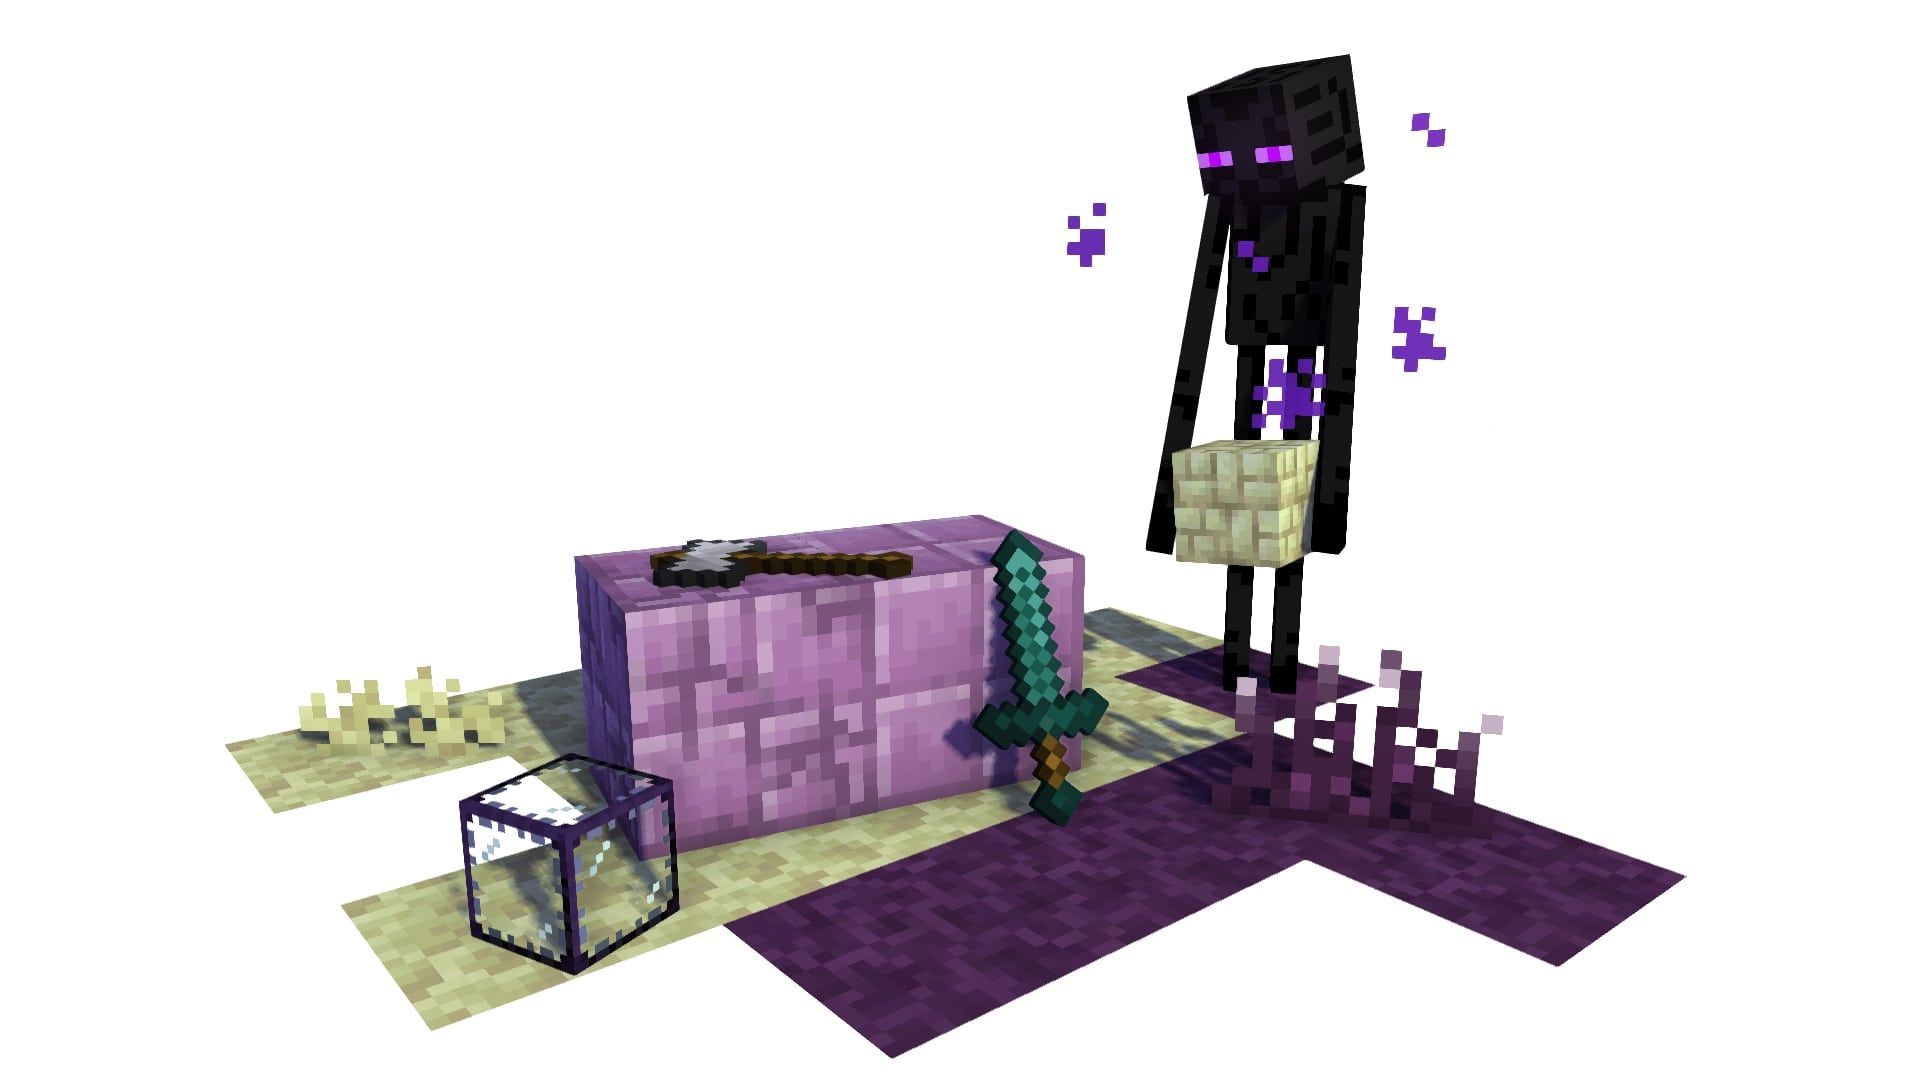 An enderman carries a carved endstone block, looking down at to purpur blocks with a diamond sword resting against them, and next to it is a block of framed glass. The ground is made up of endstone and purple grass.